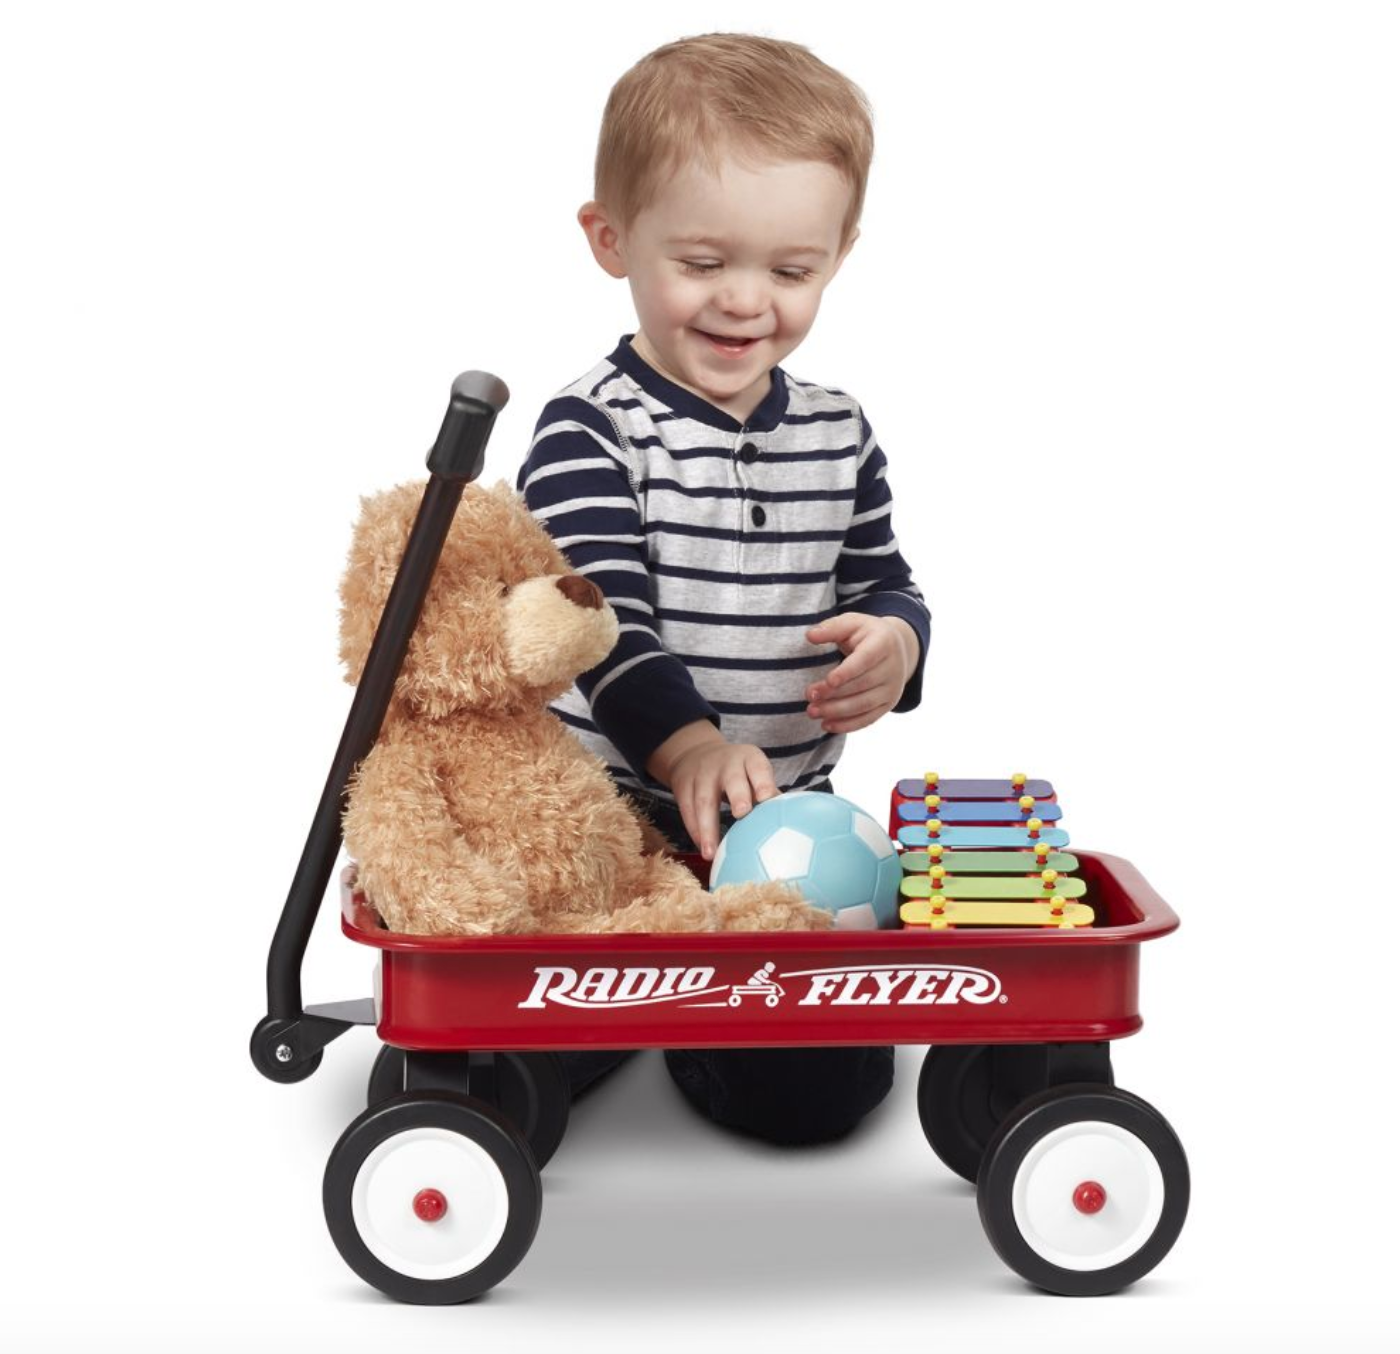 Radio Flyer is making a new mini Tesla for kids to ride